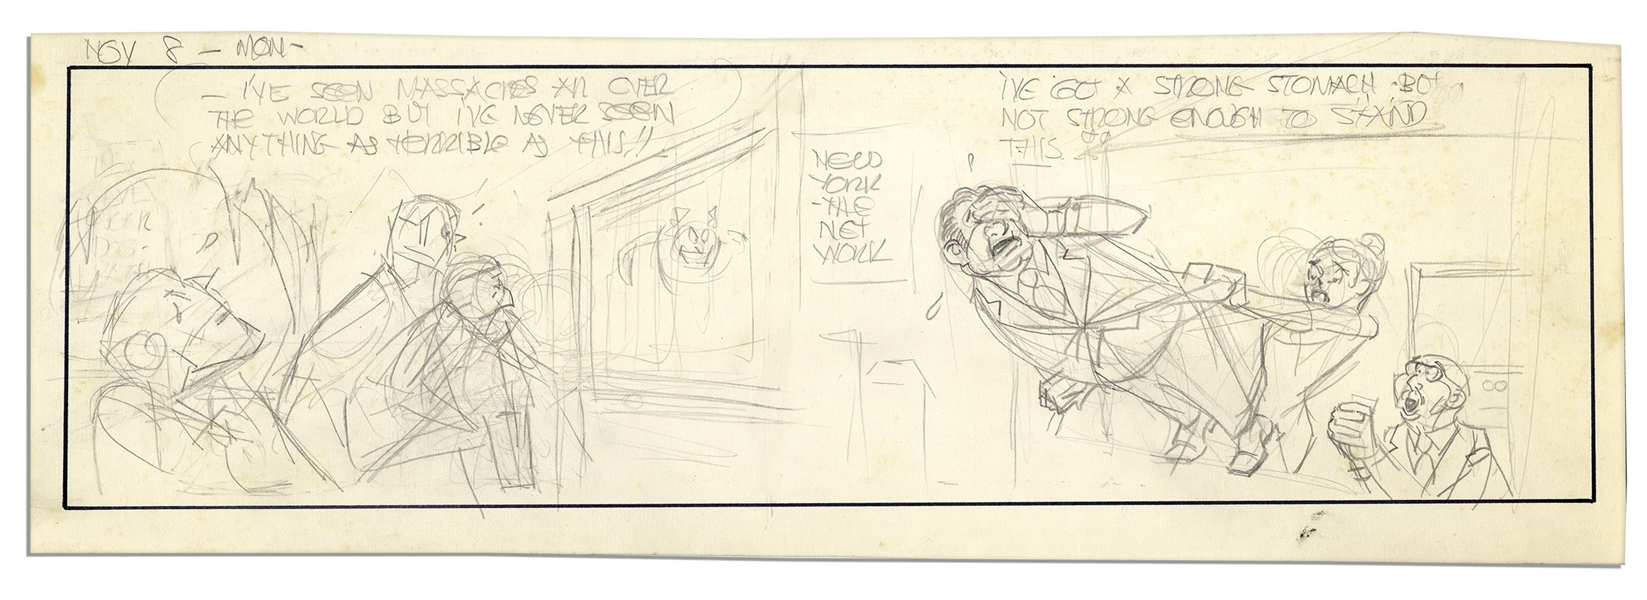 Al Capp ''Li'l Abner'' Unfinished Hand-Drawn Comic Strip -- Measures 18.75'' x 6.25'' in Pencil -- Very Good -- From the Al Capp Estate